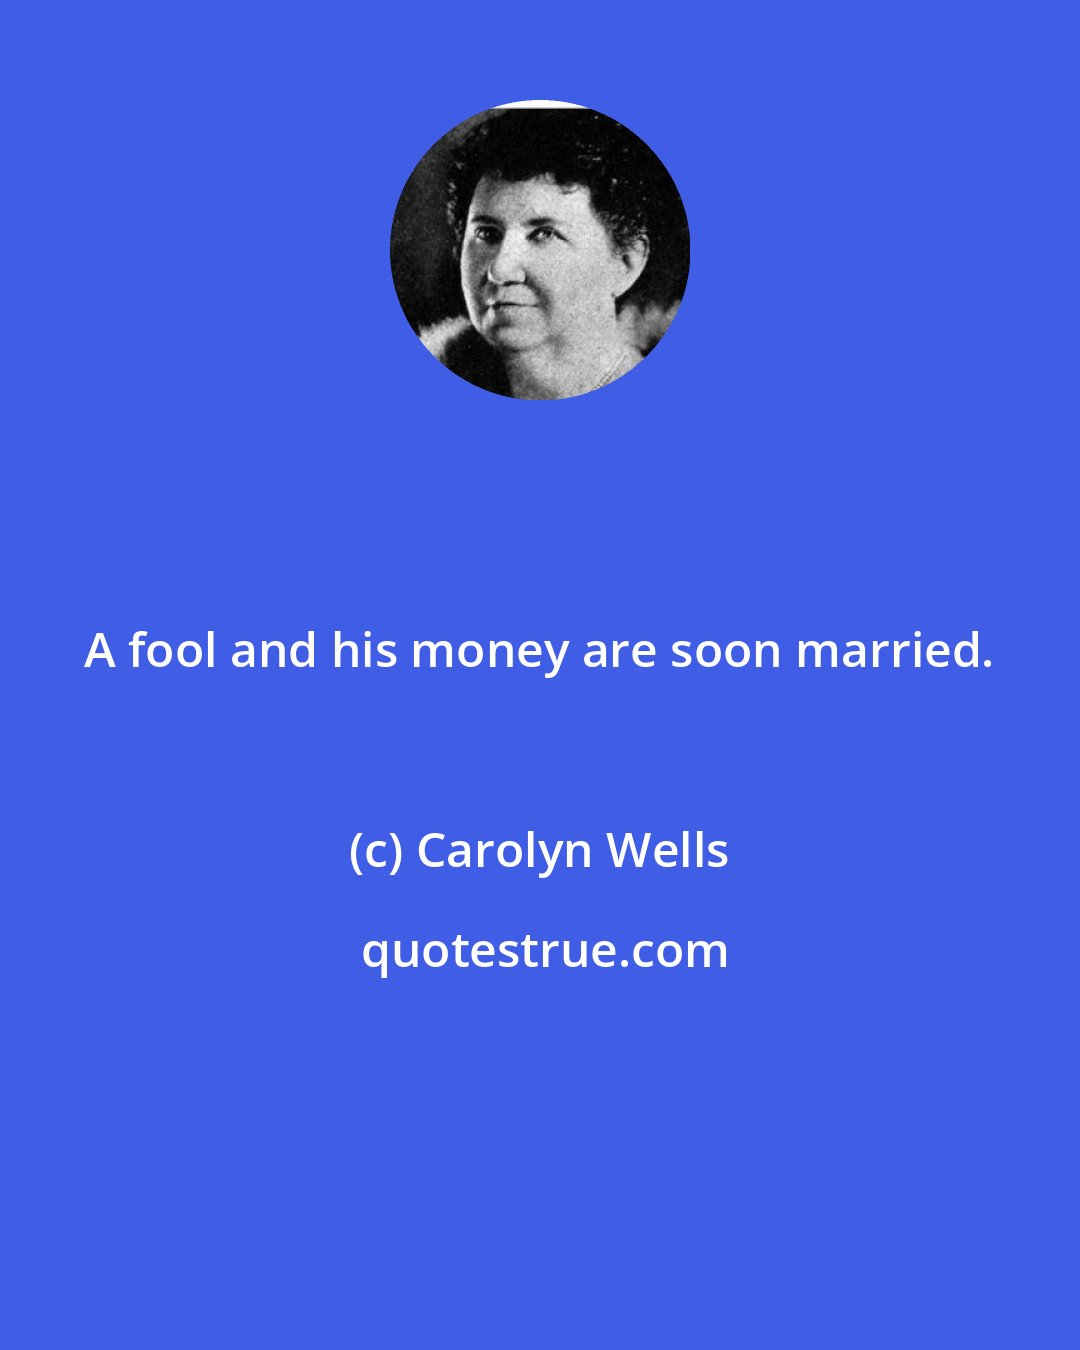 Carolyn Wells: A fool and his money are soon married.